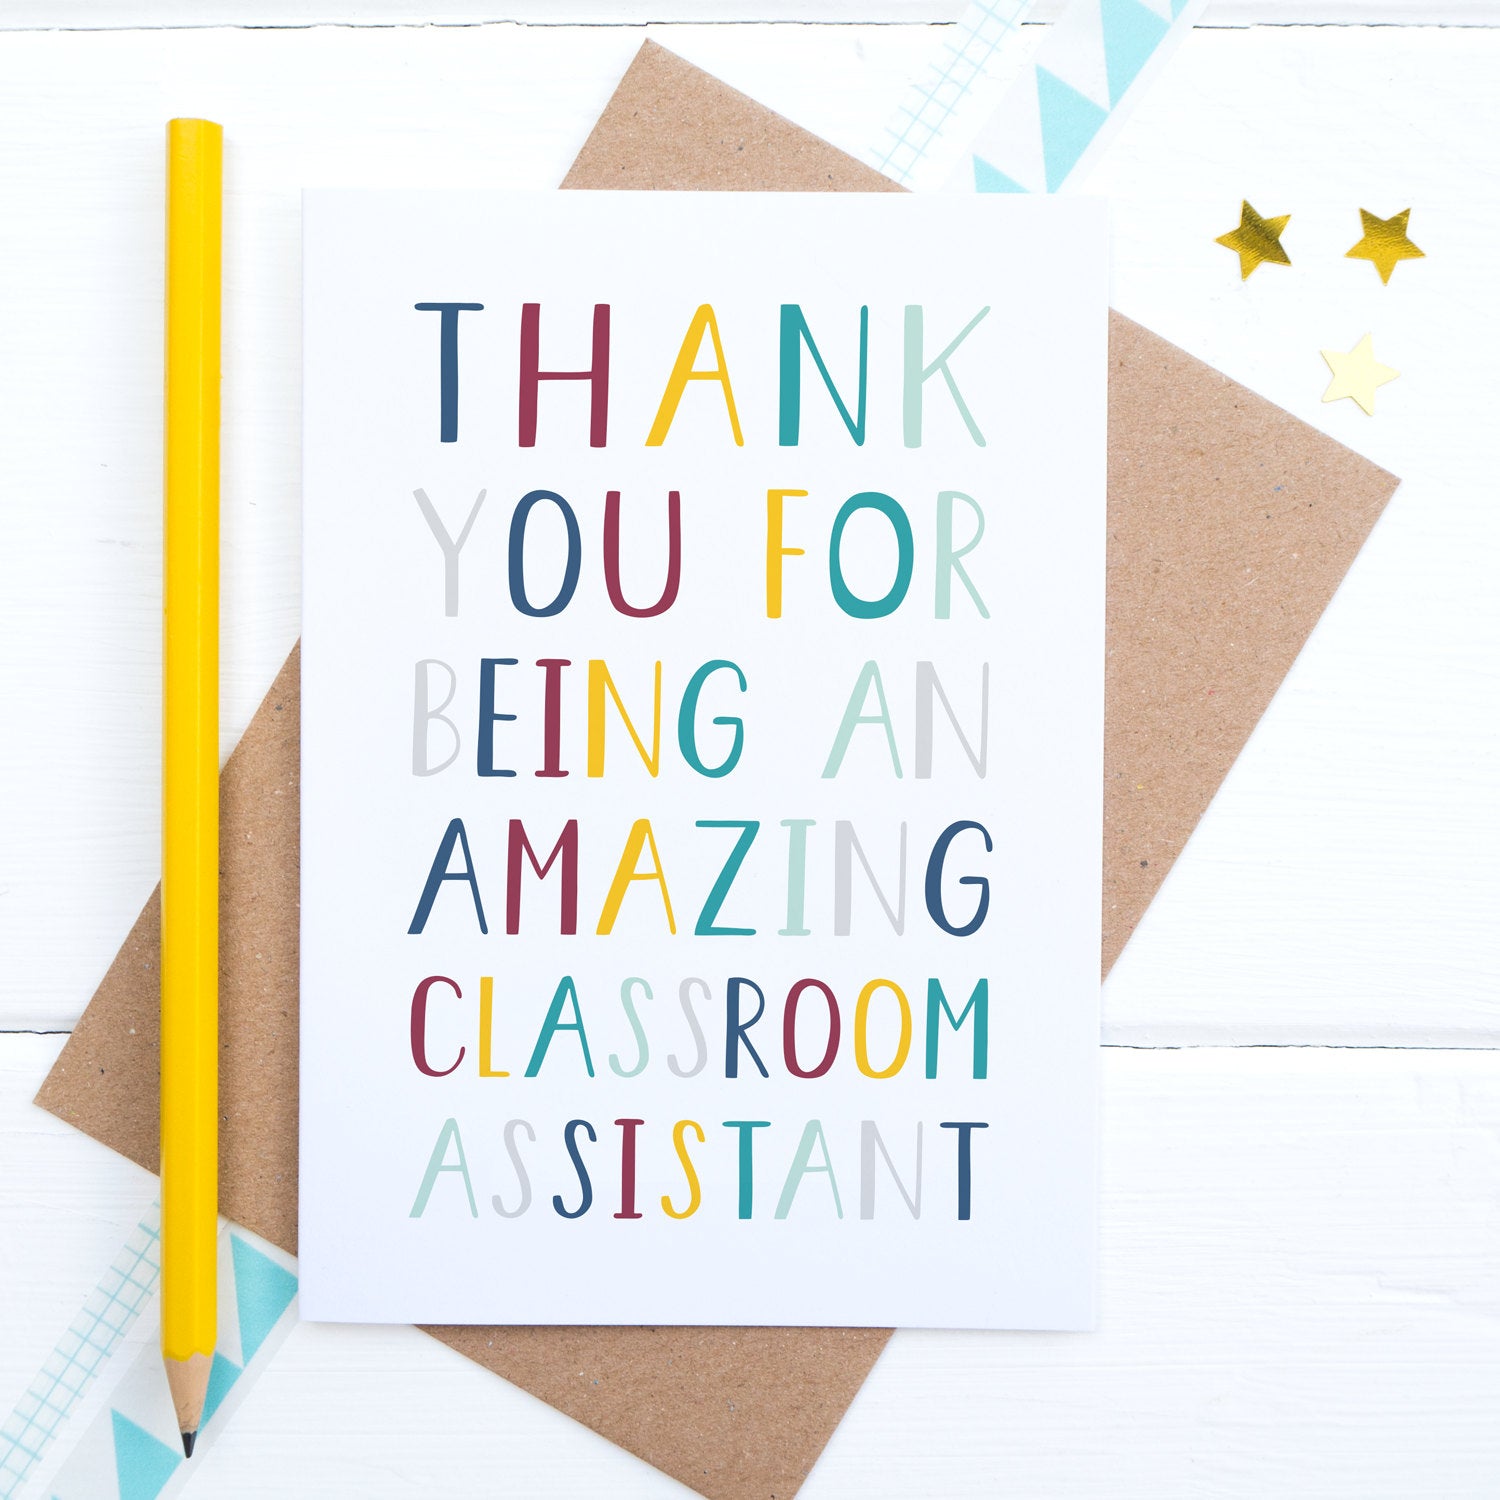 Thank you for being an amazing classroom assistant - end of term thank you card.